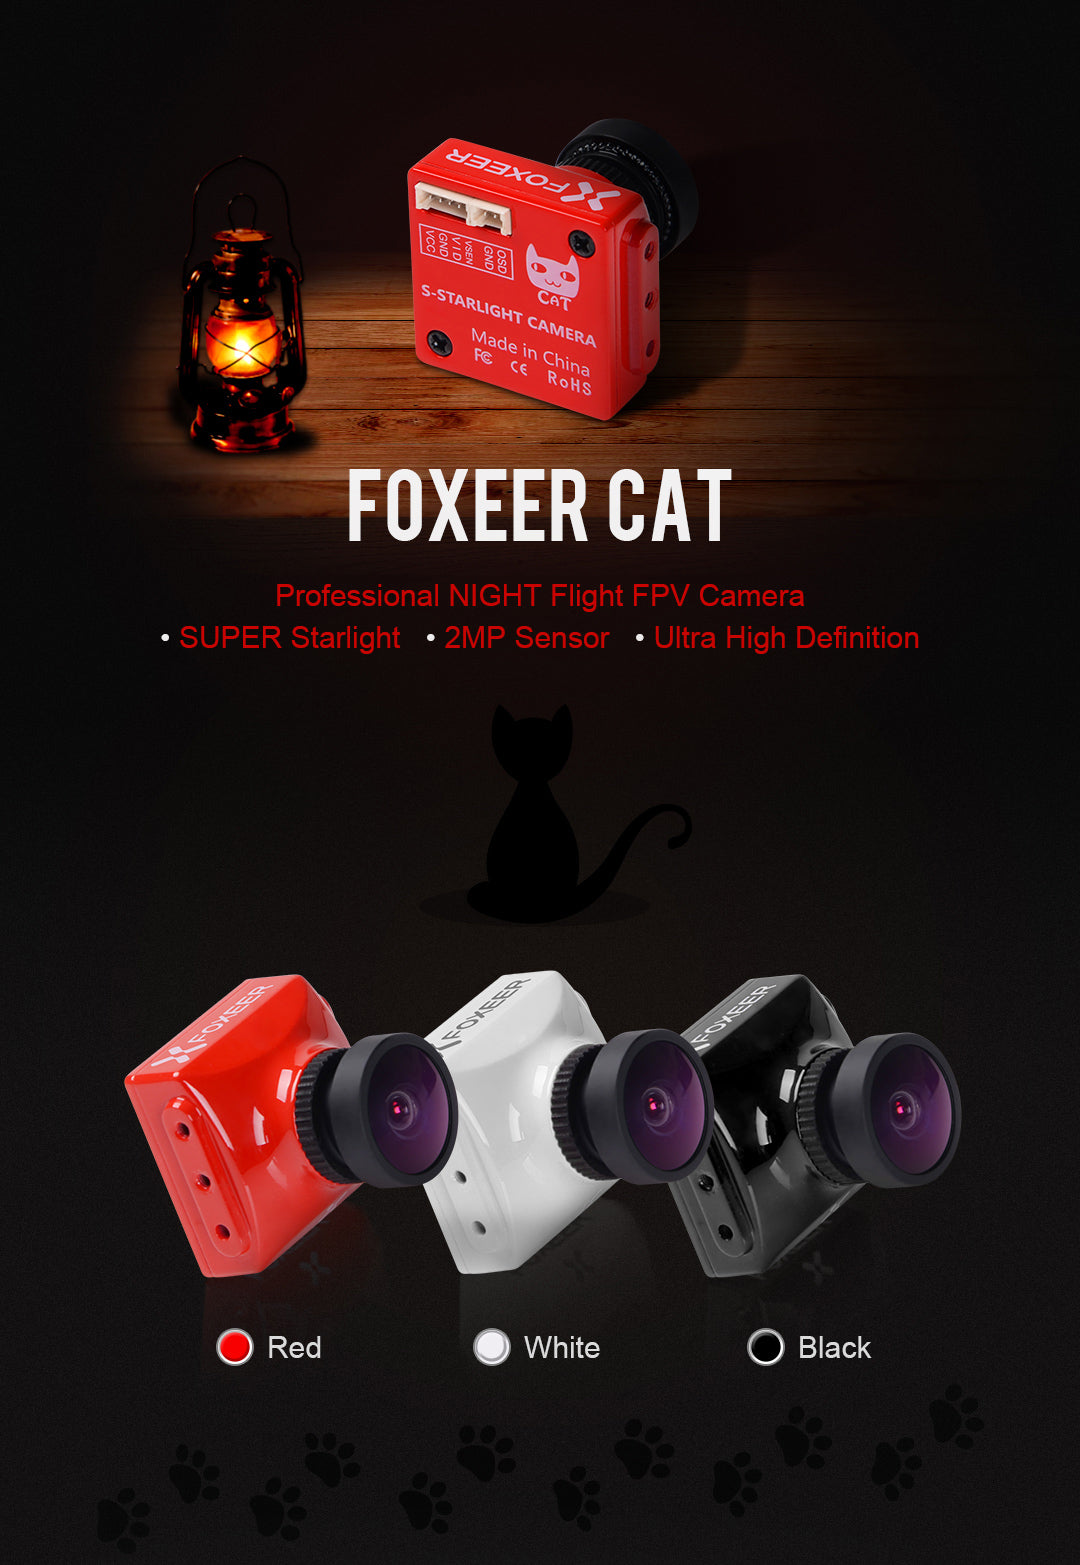 Foxeer Cat Super Starlight FPV Camera 0.0001lux Low Latency HS1224